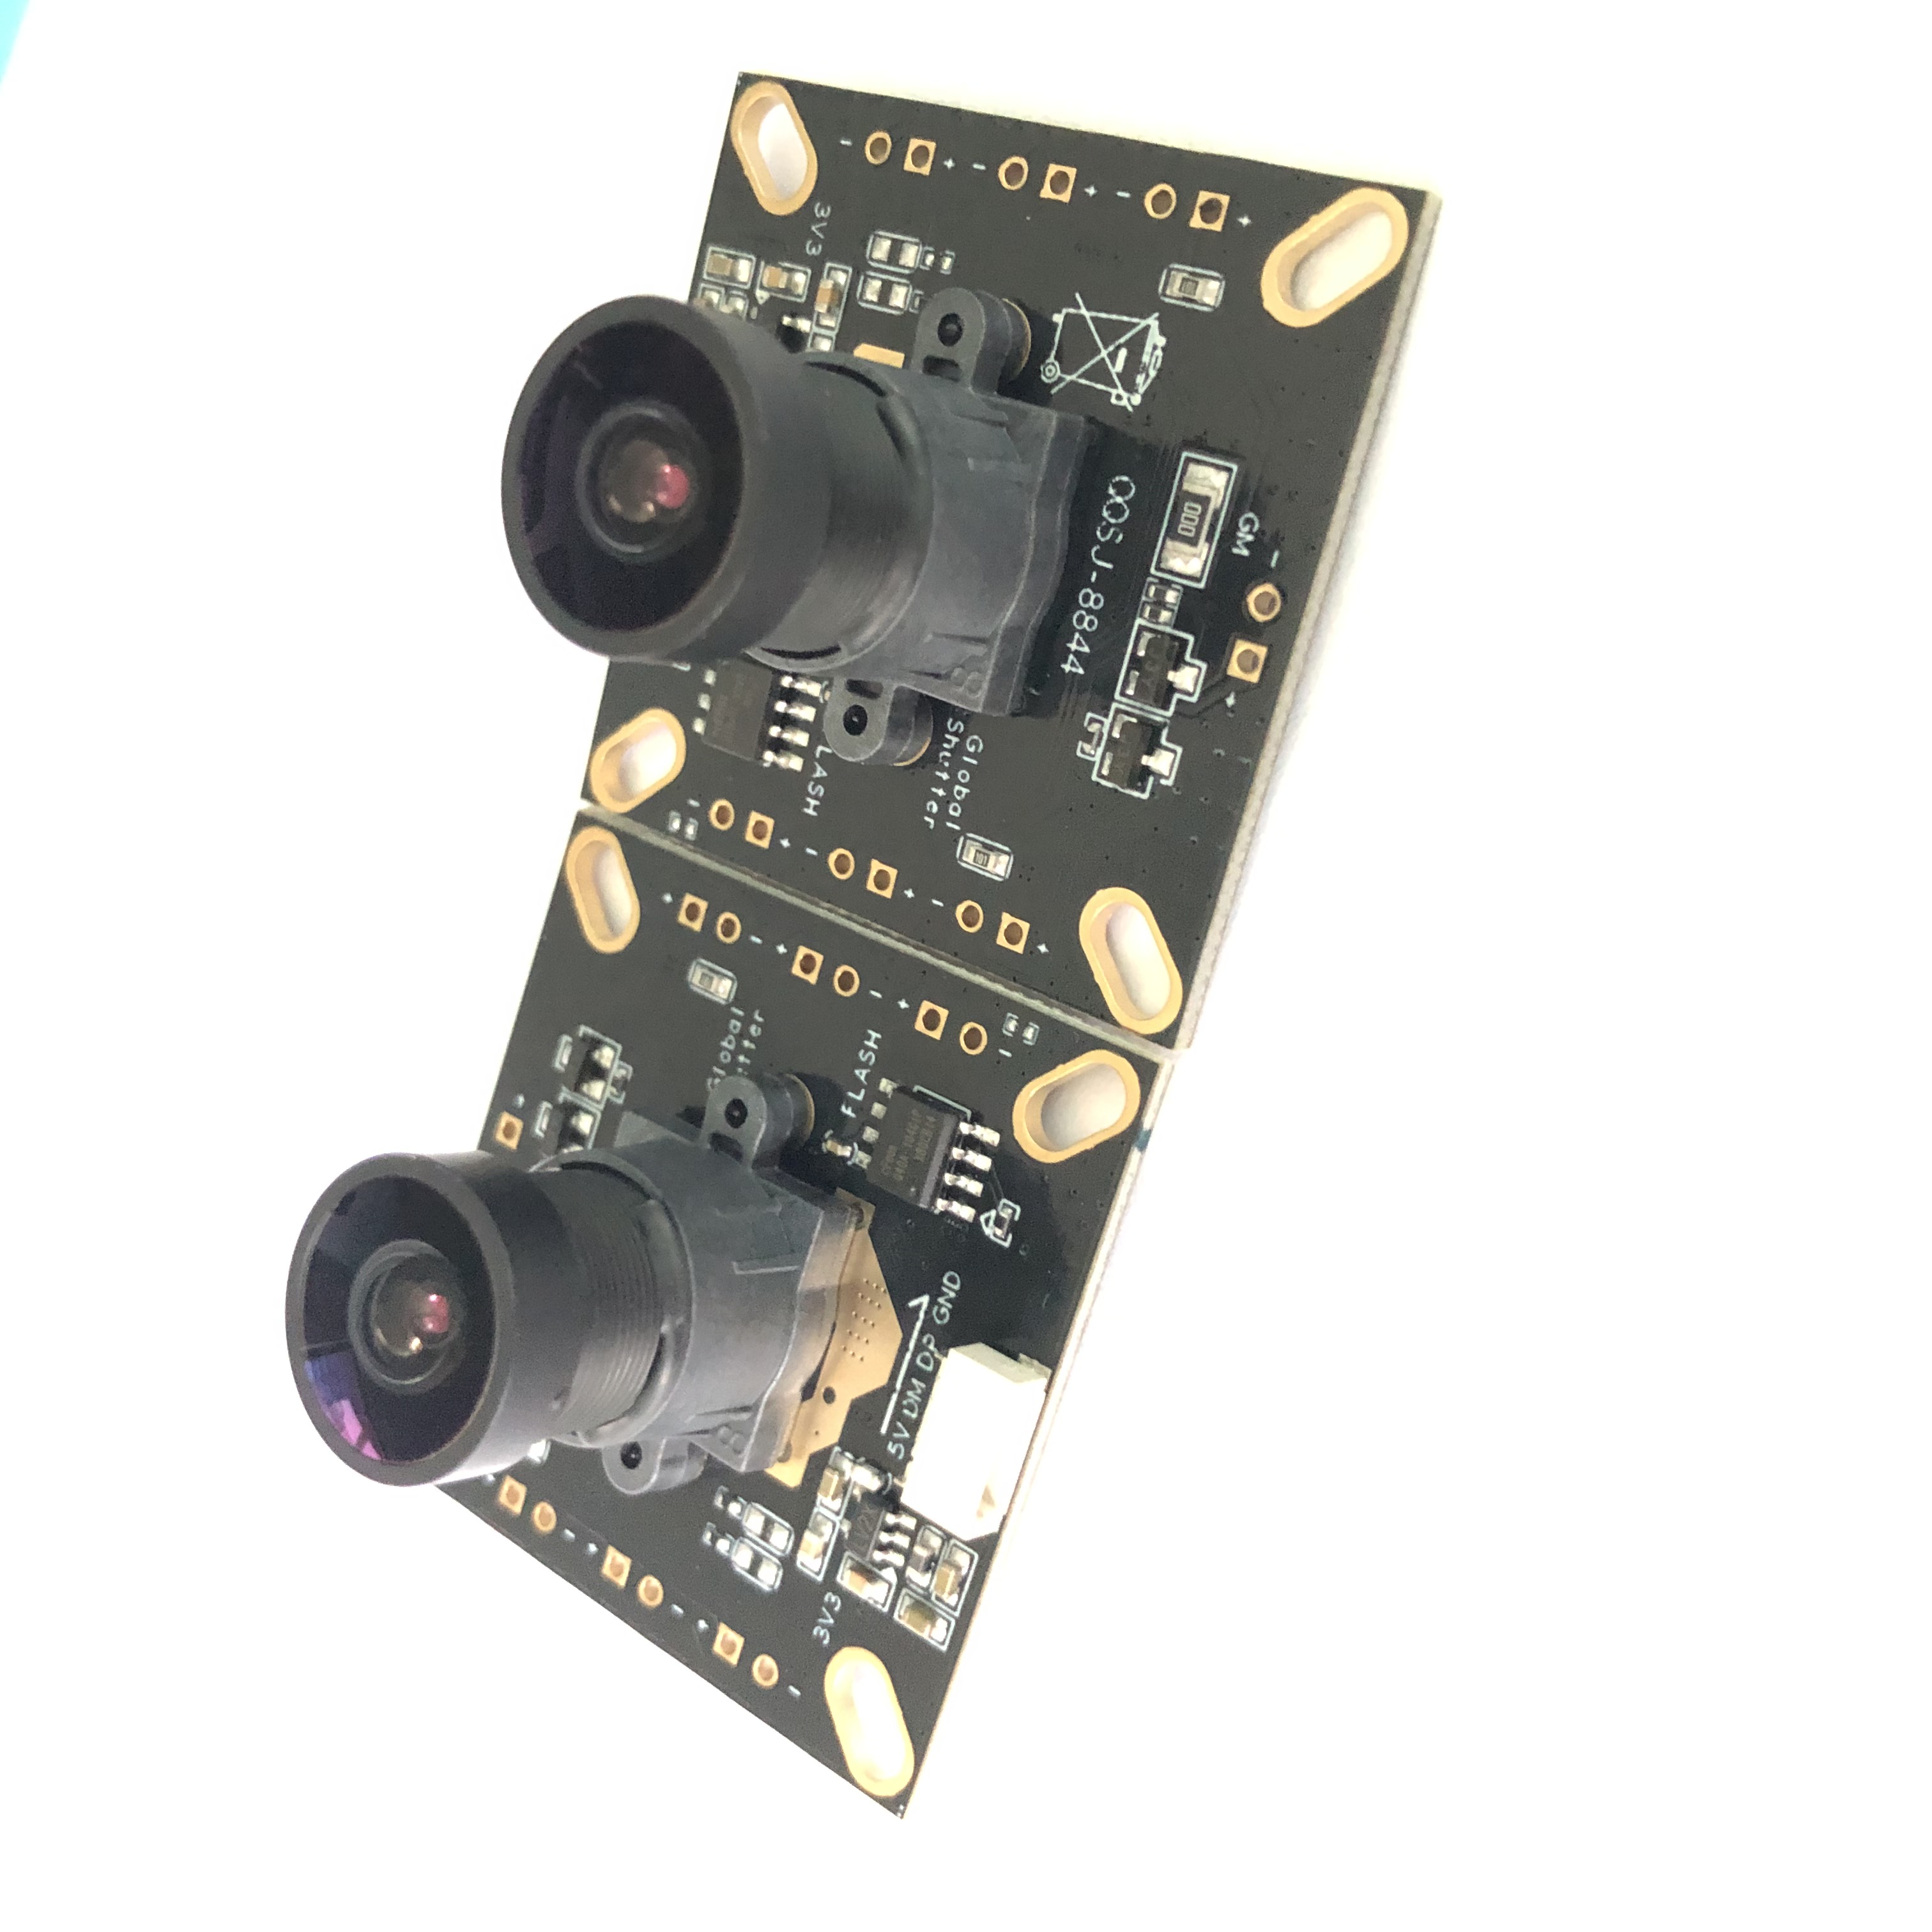 8 Year Exporter Isp Sensor Camera Module - AR0144 USB Camera modules  Global exposure Automatic Infrared Switching Module   120fps modules – Ronghua